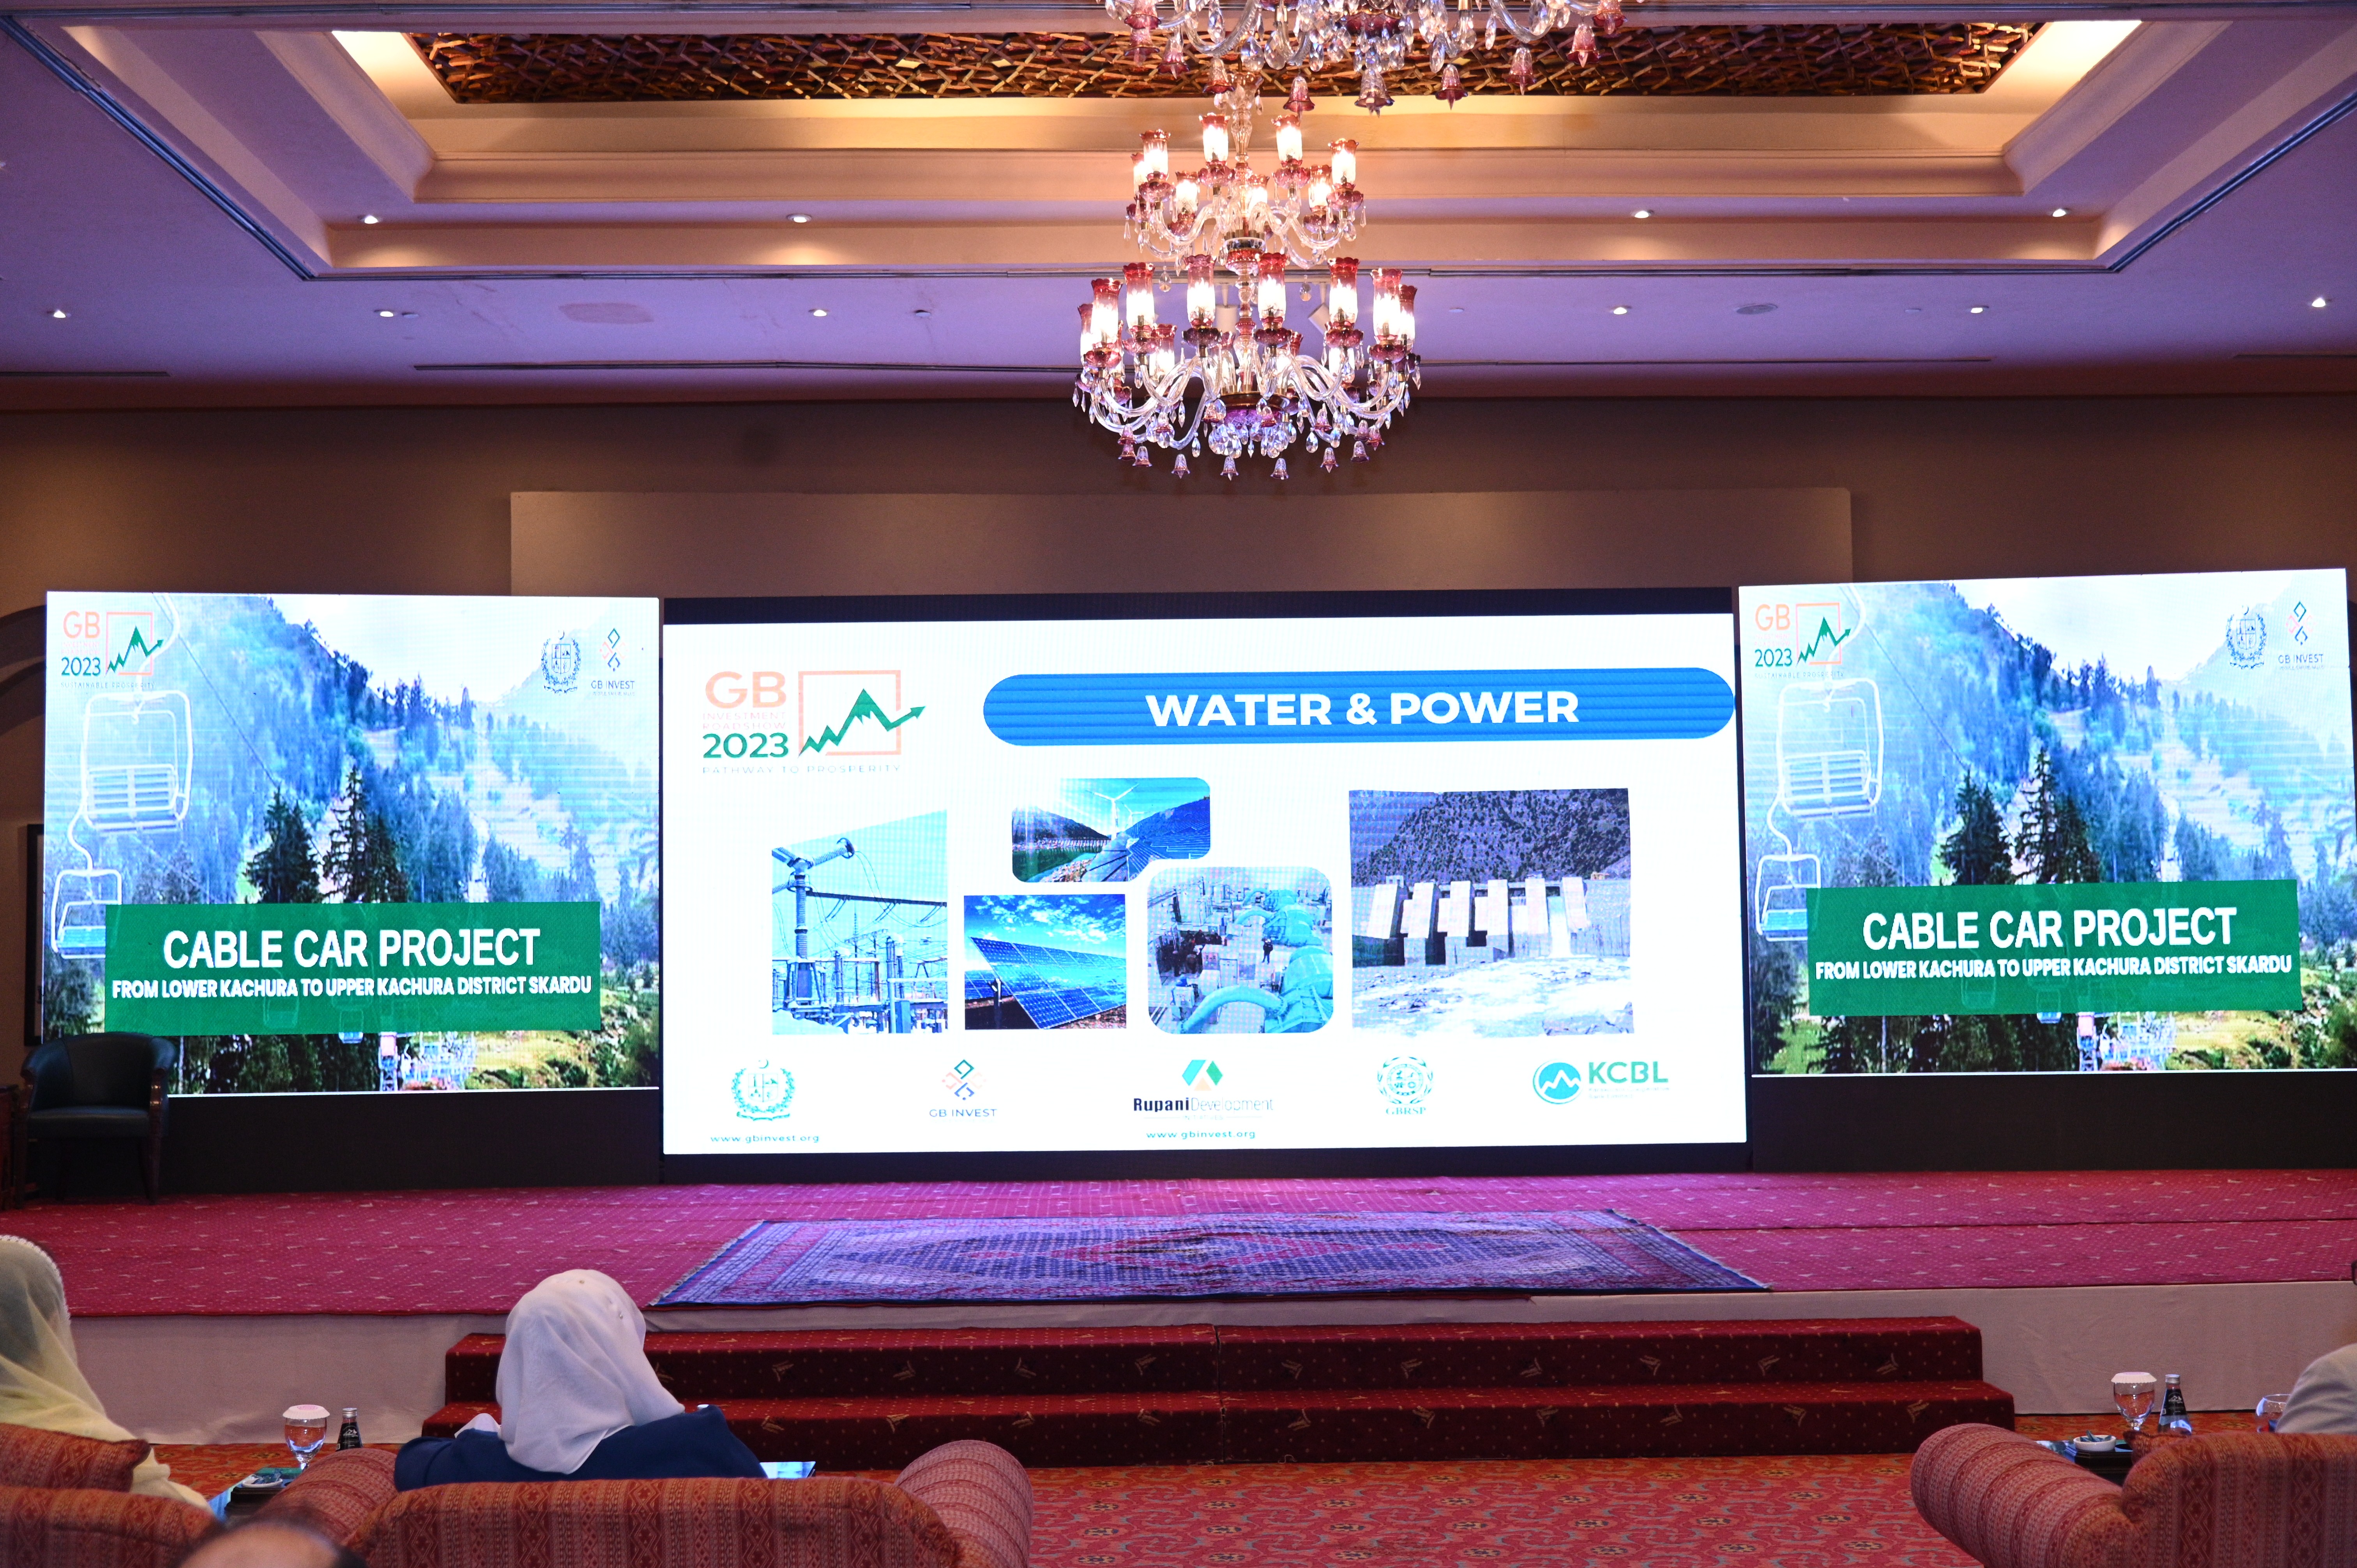 A projector displaying the water and power sector of the GB Investment roadshow